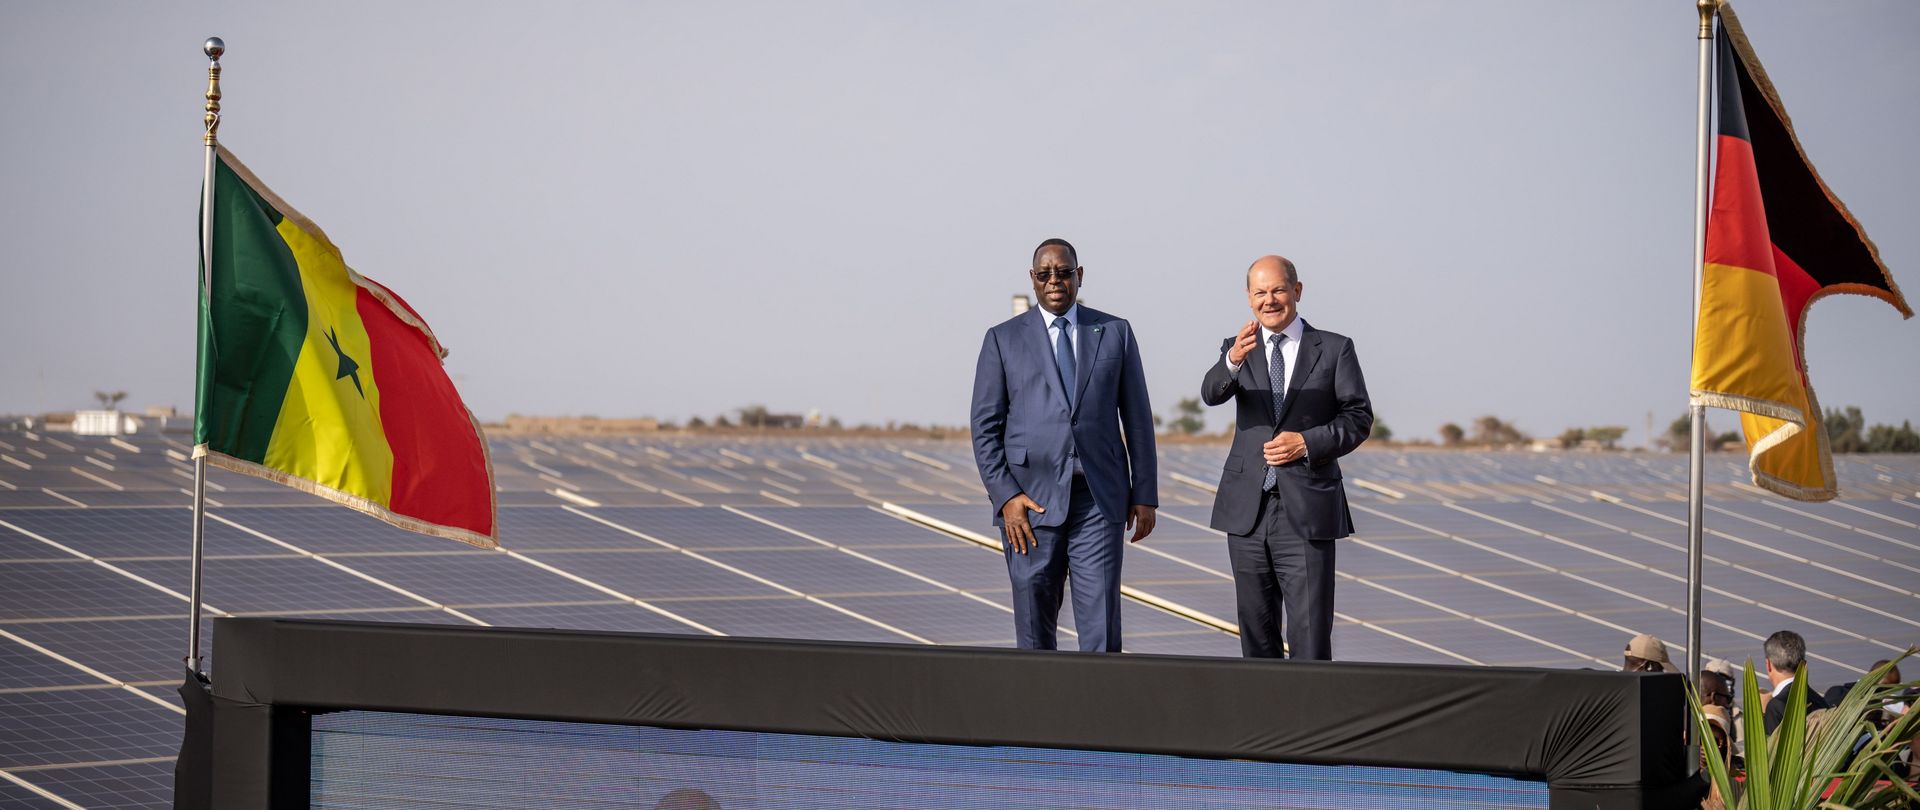 President Macky Sall (l.) and German Chancellor Olaf Scholz (r.) open a photovoltaic plant during the Chancellor